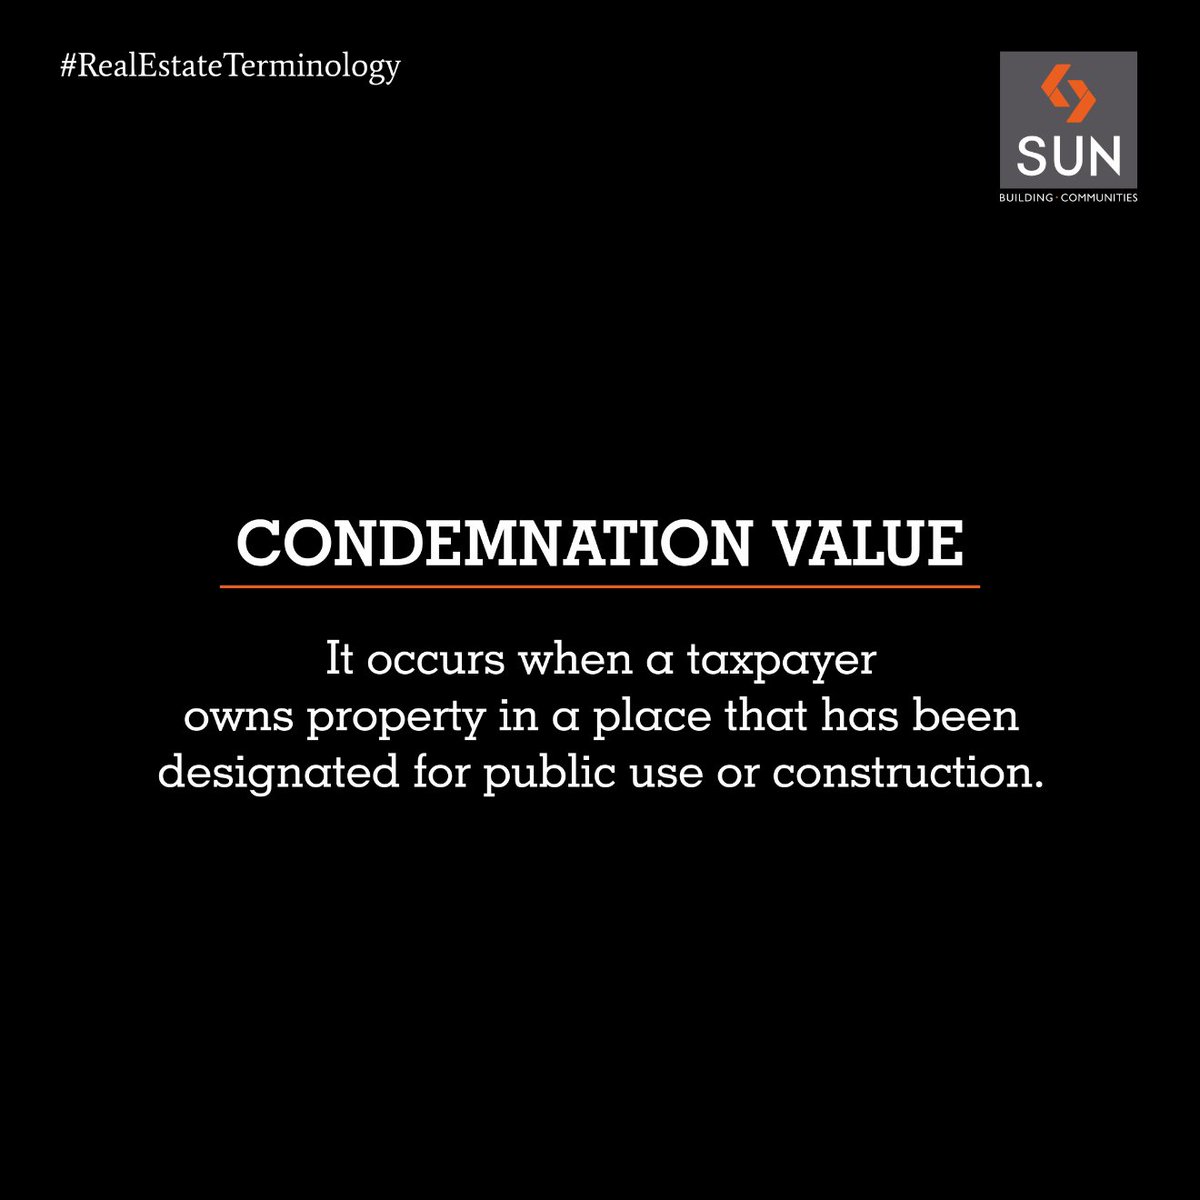 #RealEstateTerminology
A property is seized by the public authority and the owner is offered the market value of it. https://t.co/Ld1kE9mptV